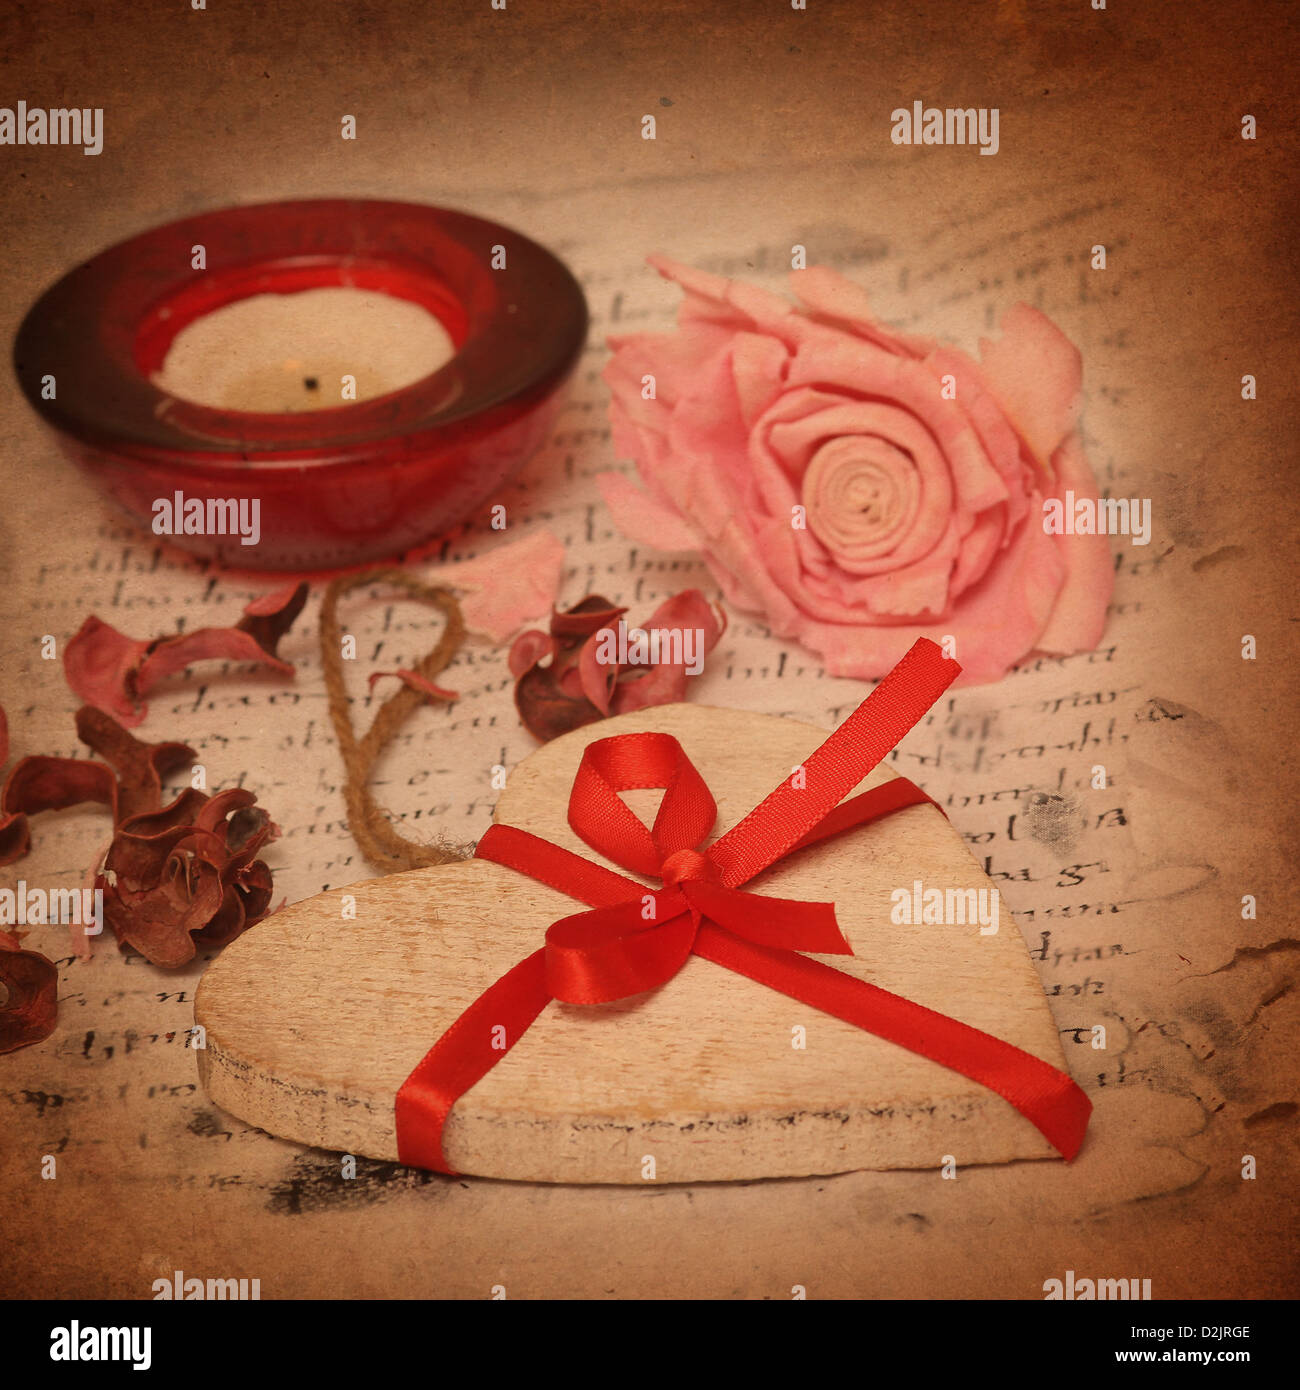 Vintage Holidays heart with a rose on old letter Stock Photo